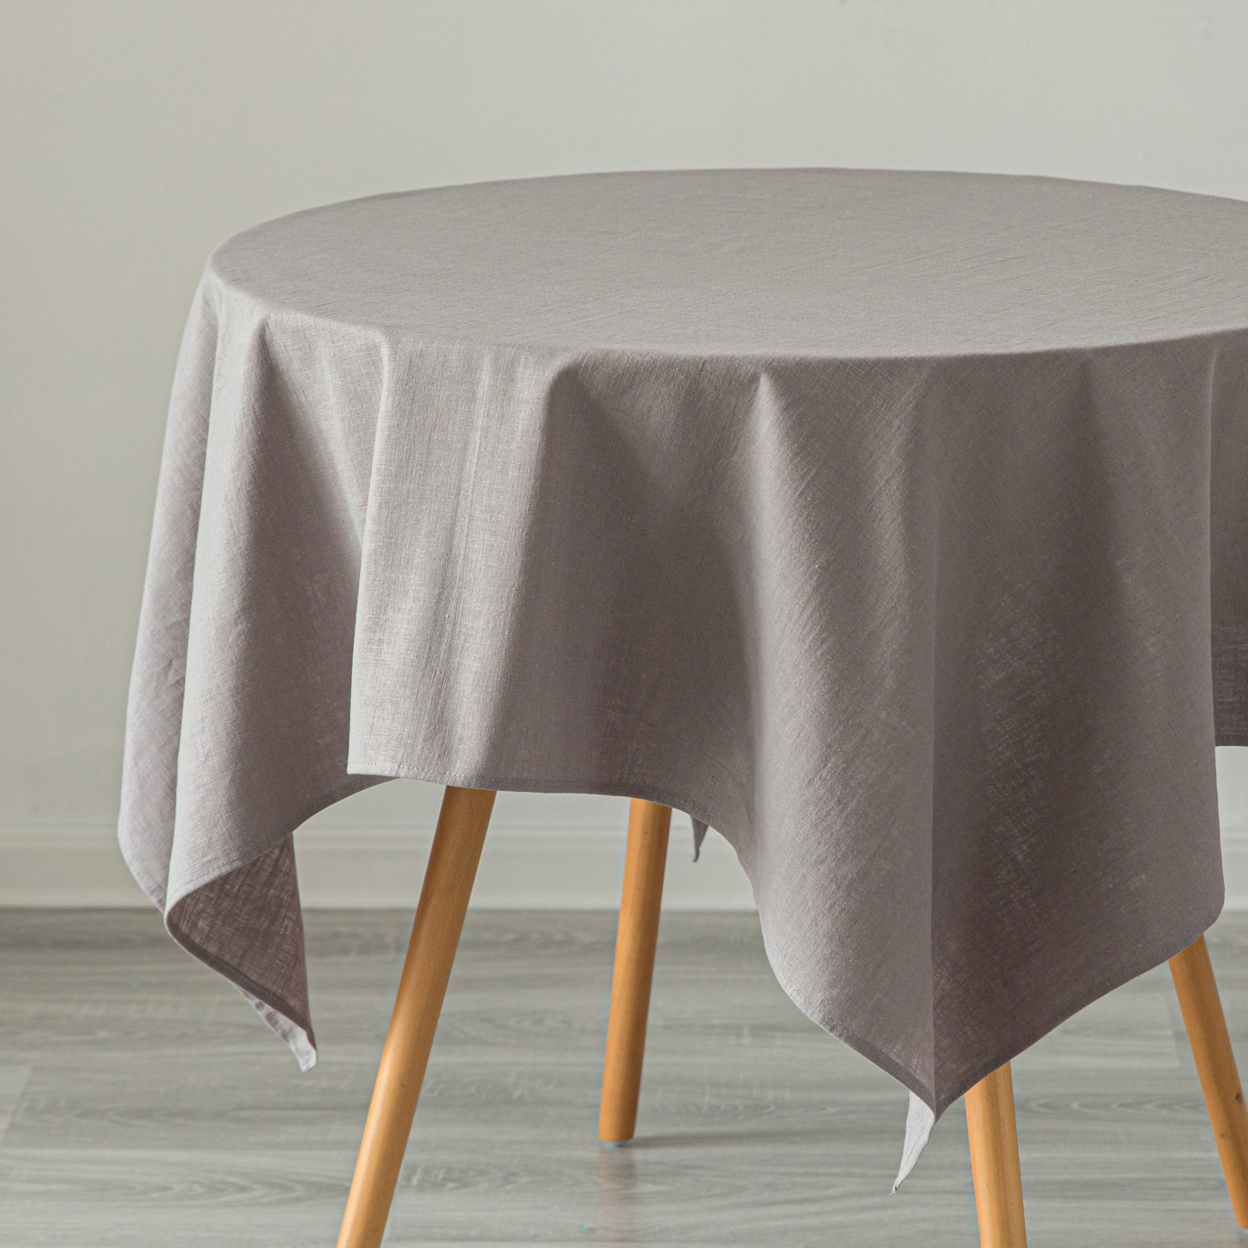 Deerlux 100 Percent Pure Linen Washable Tablecloth Solid Color - 52 X 70 In. Gray